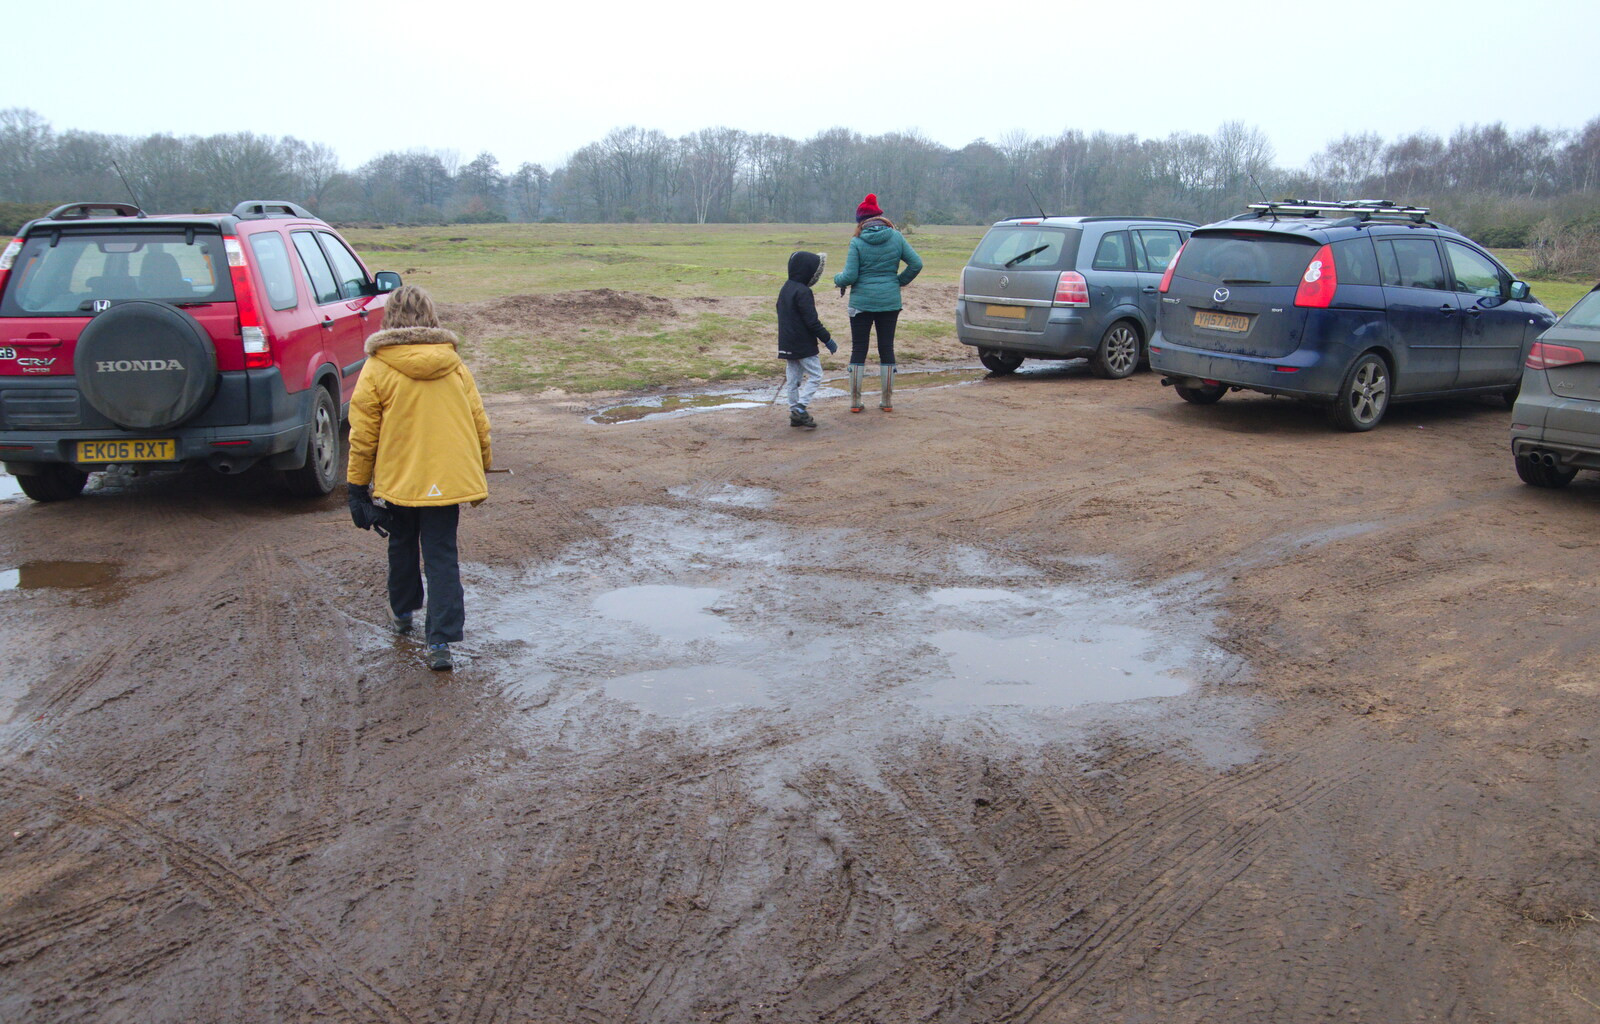 In the muddy car park from New Year's Day on the Ling, Wortham, Suffolk - 1st January 2020